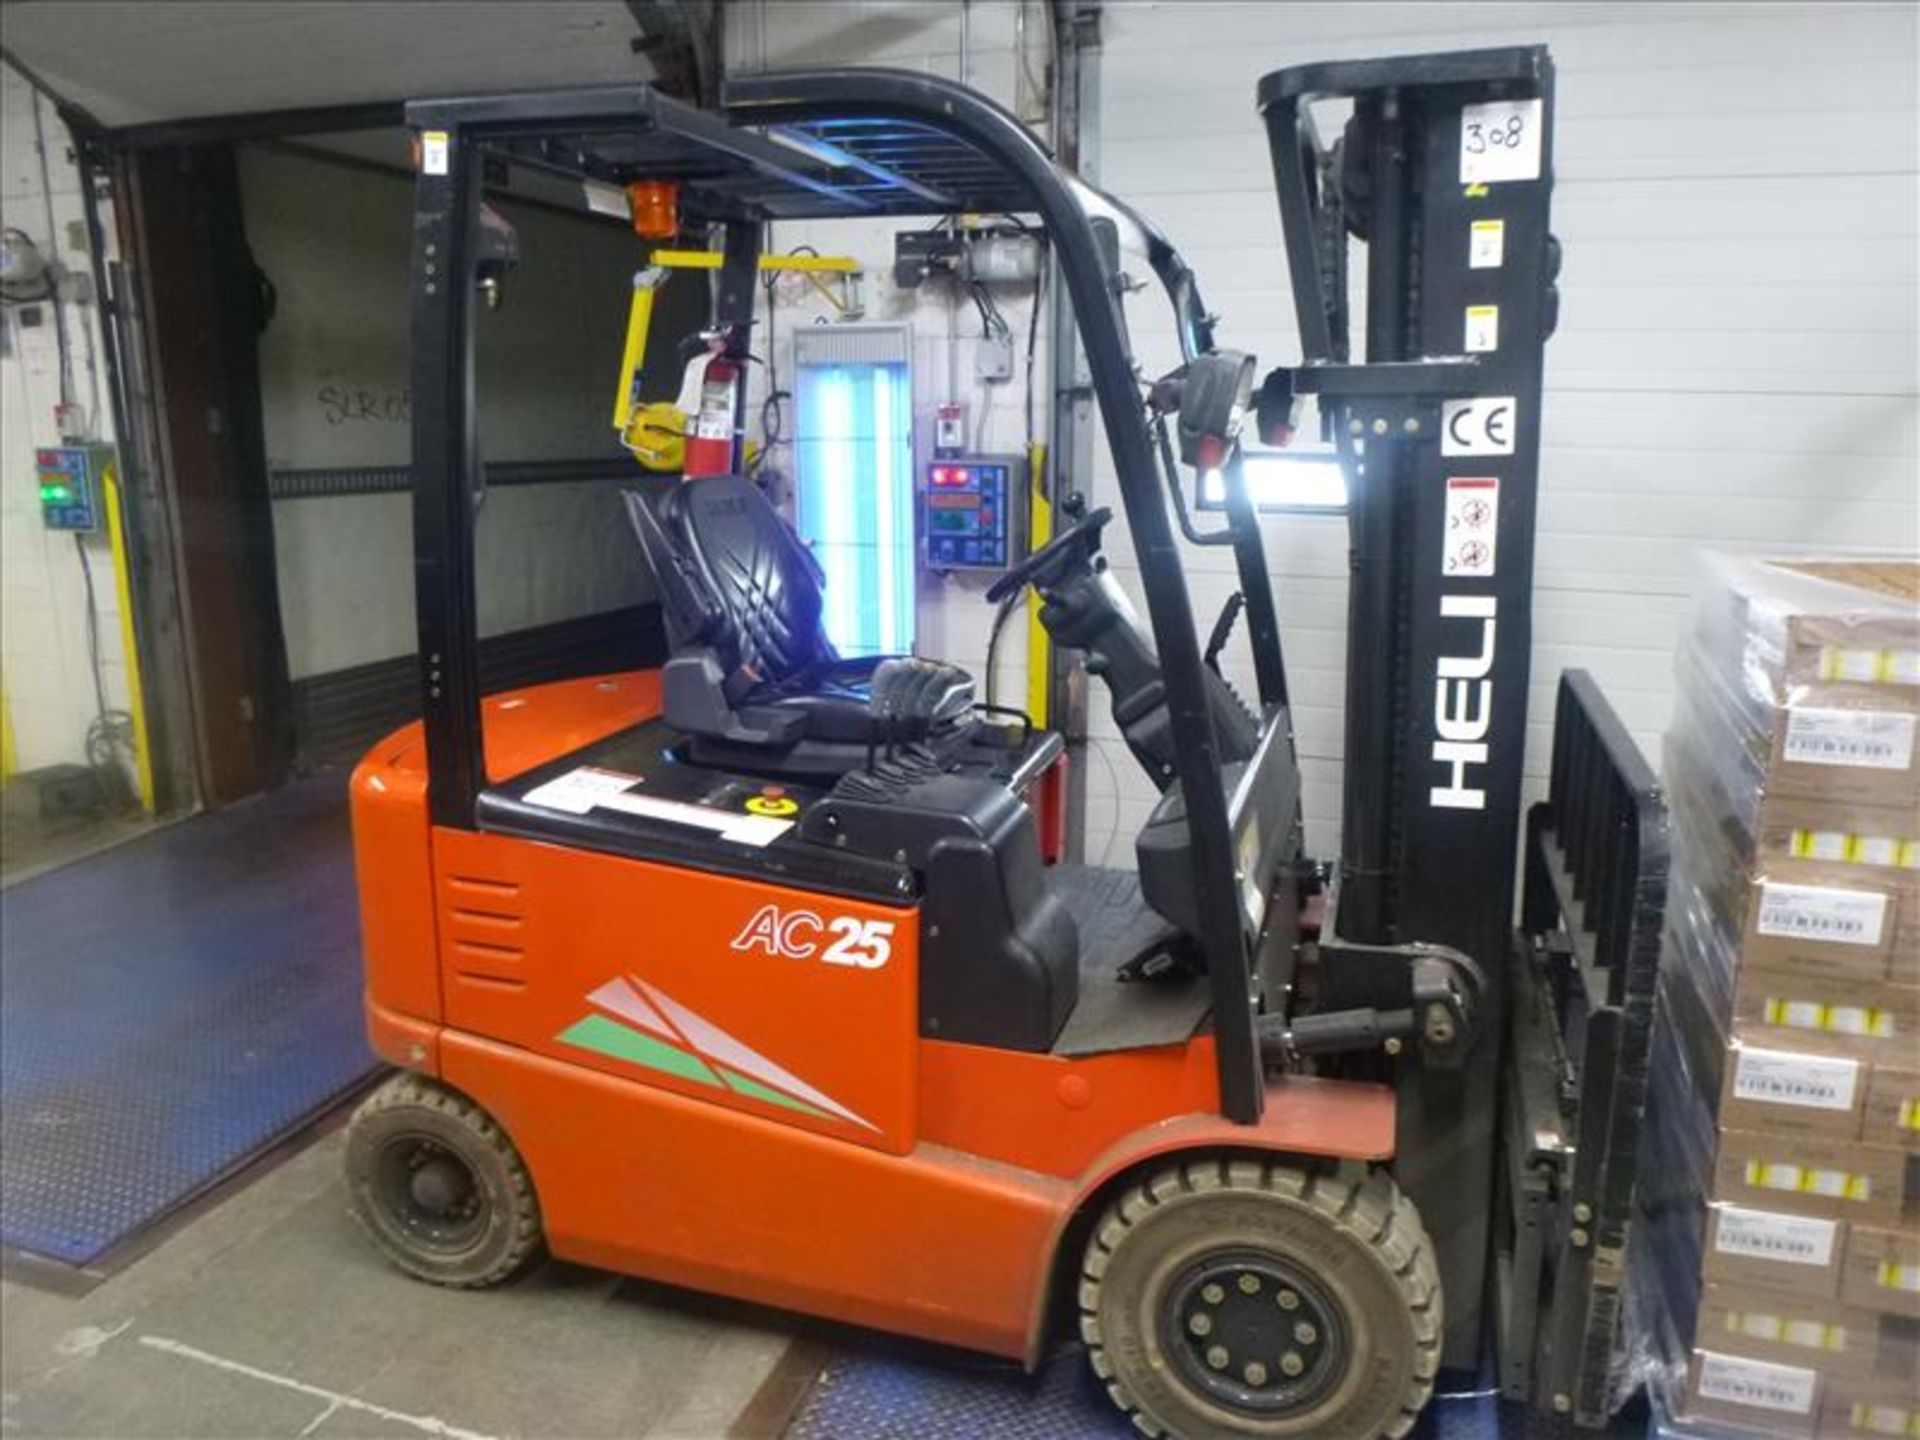 Heli AC25 electric forklift truck, model CPD25, ser. no. 050251G8460, 4512 lbs. cap. @ 24" load